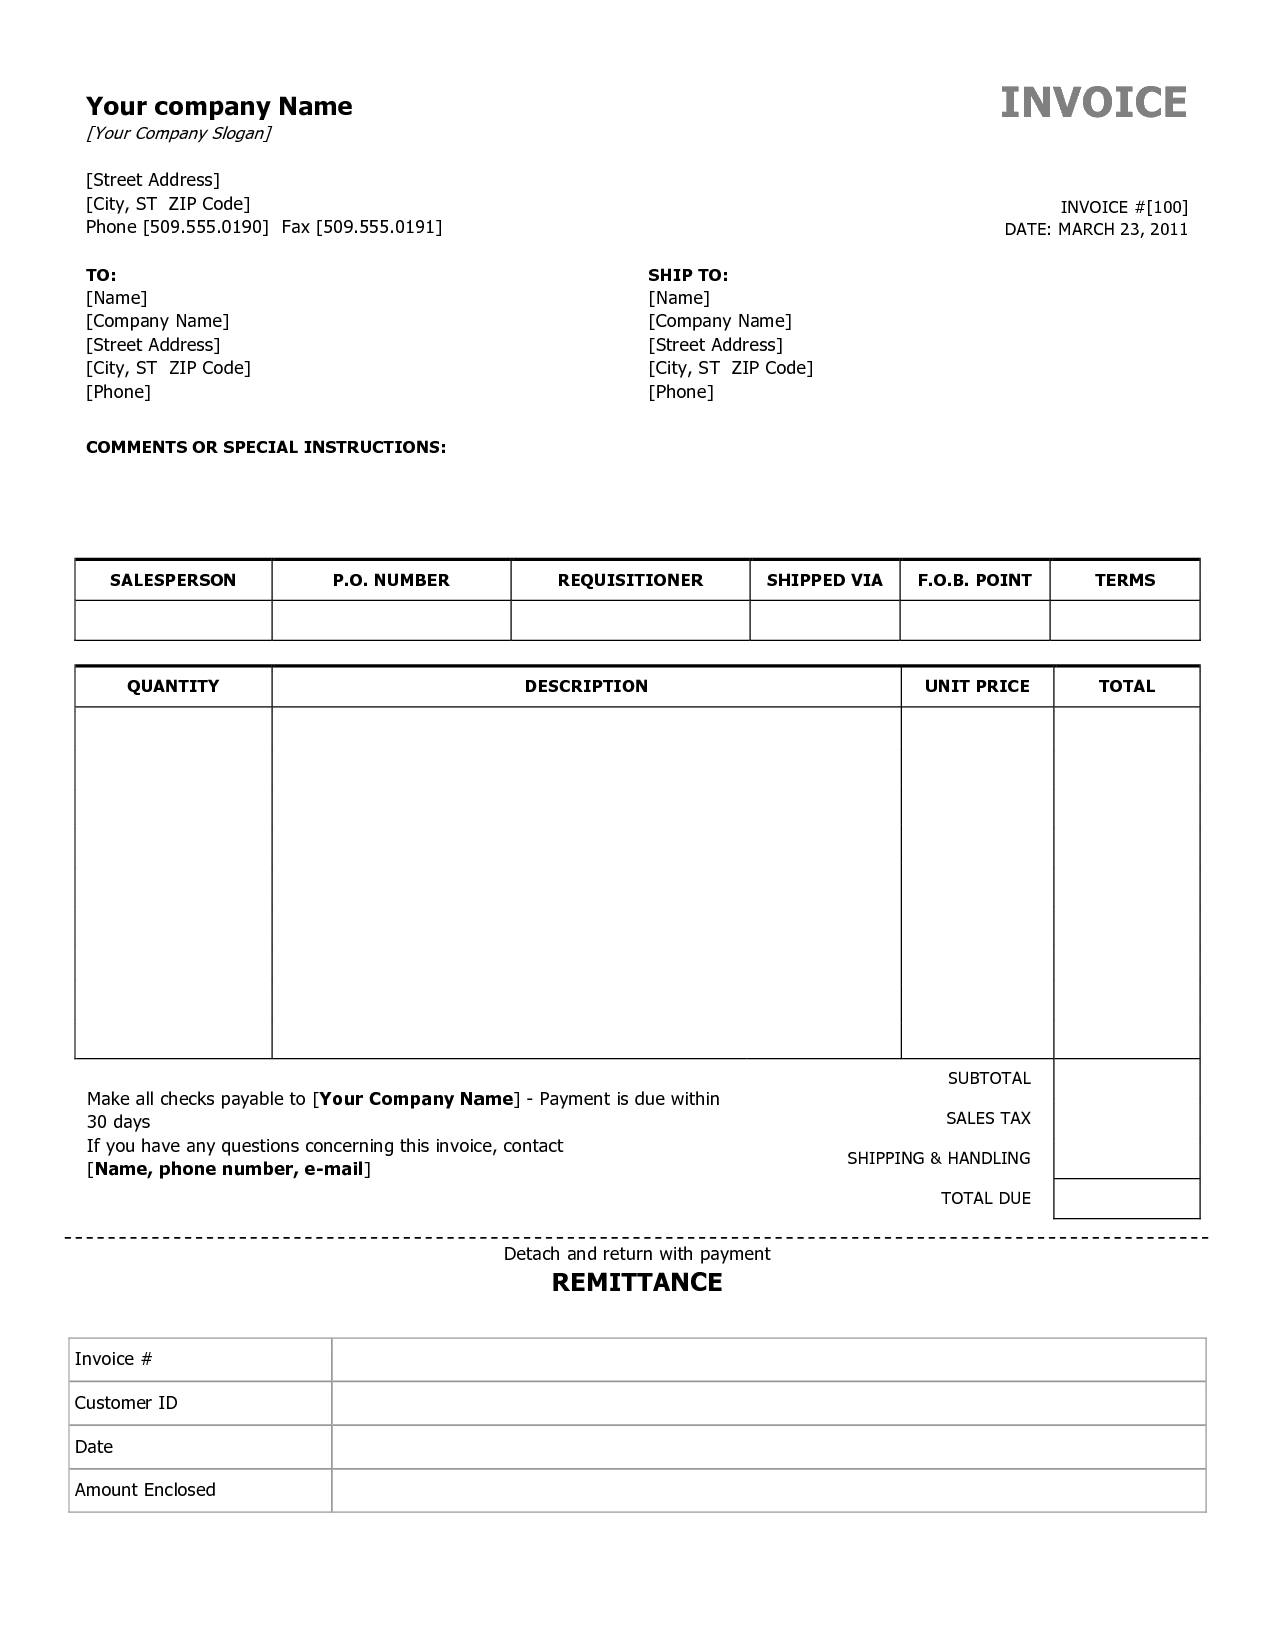 sample invoice template simple invoice templates printable free simple invoice example